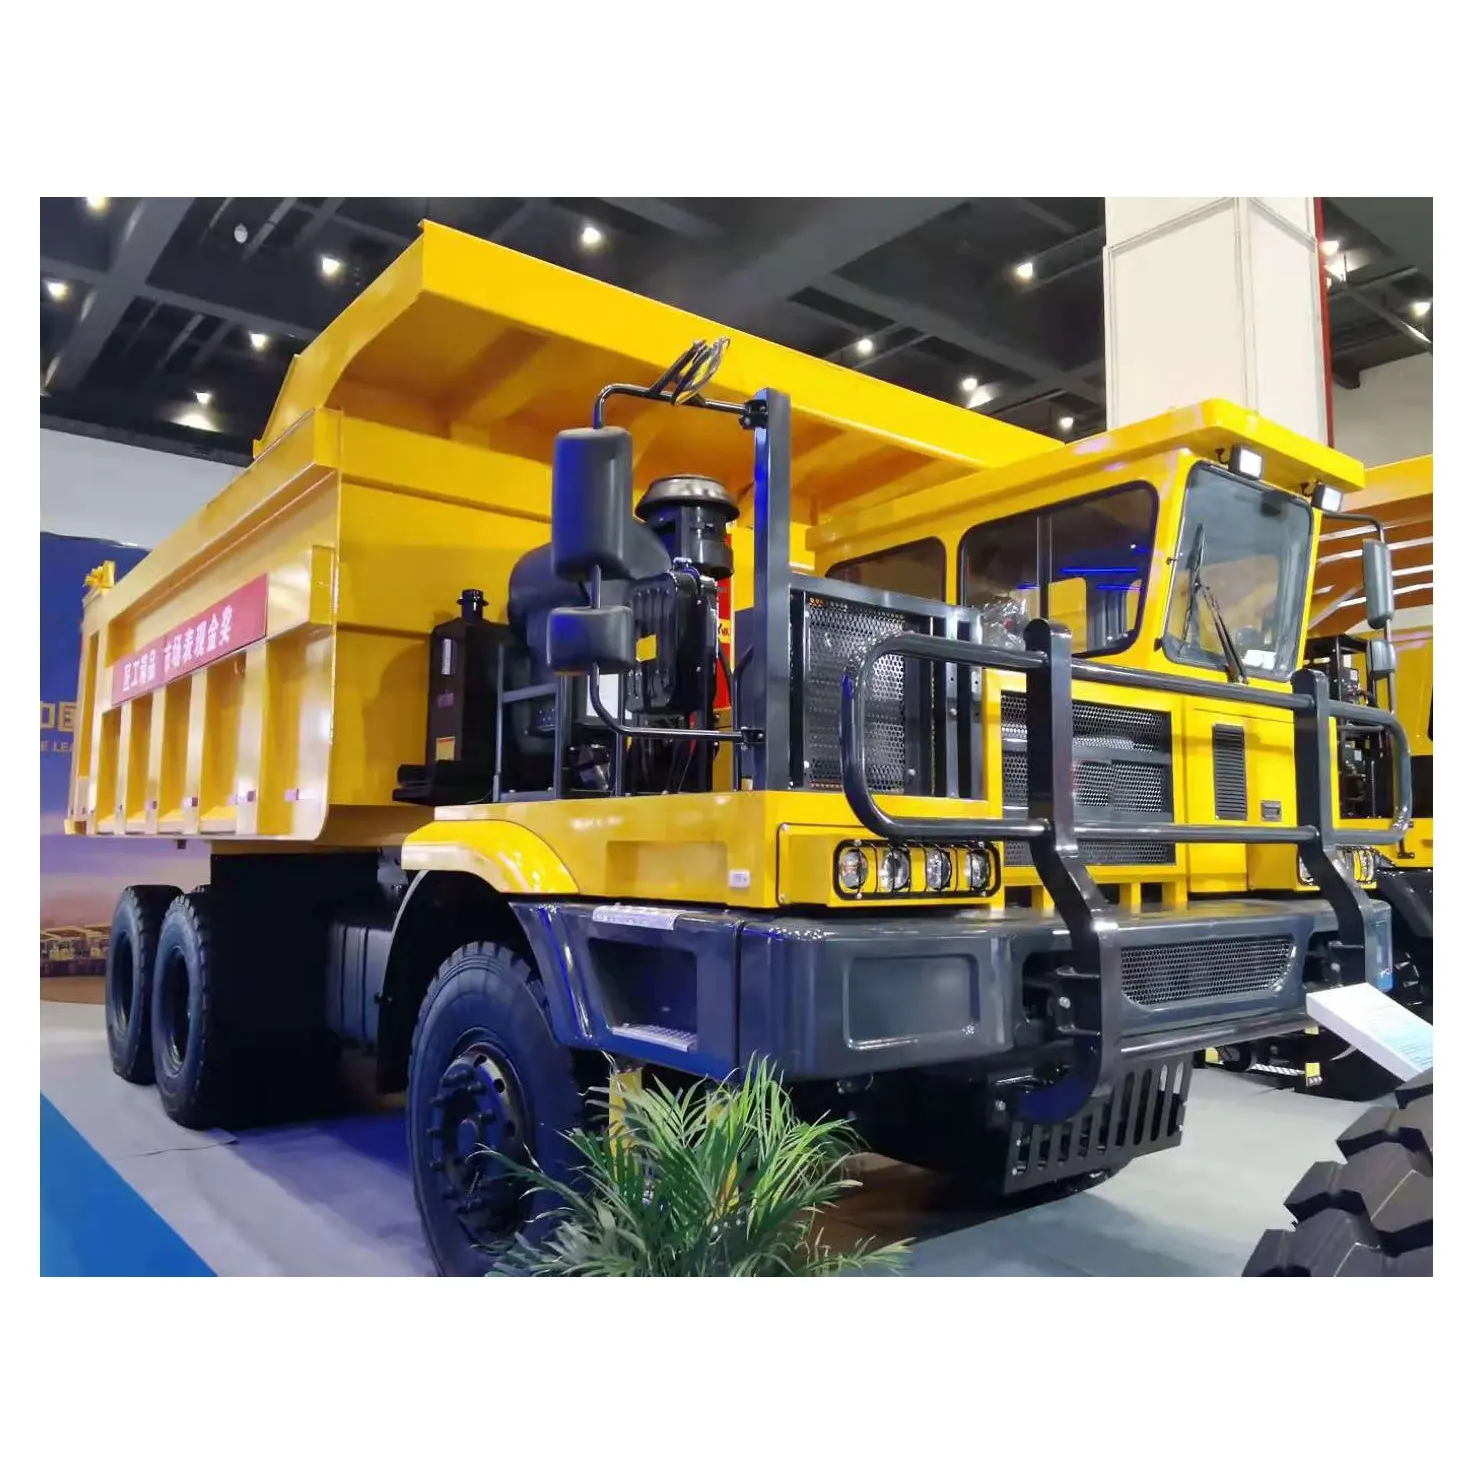 ZKEPAI NEW MINING DUMP TRUCK, MINE TRUCK RATED LOAD 40-60 TONS FOR SALE